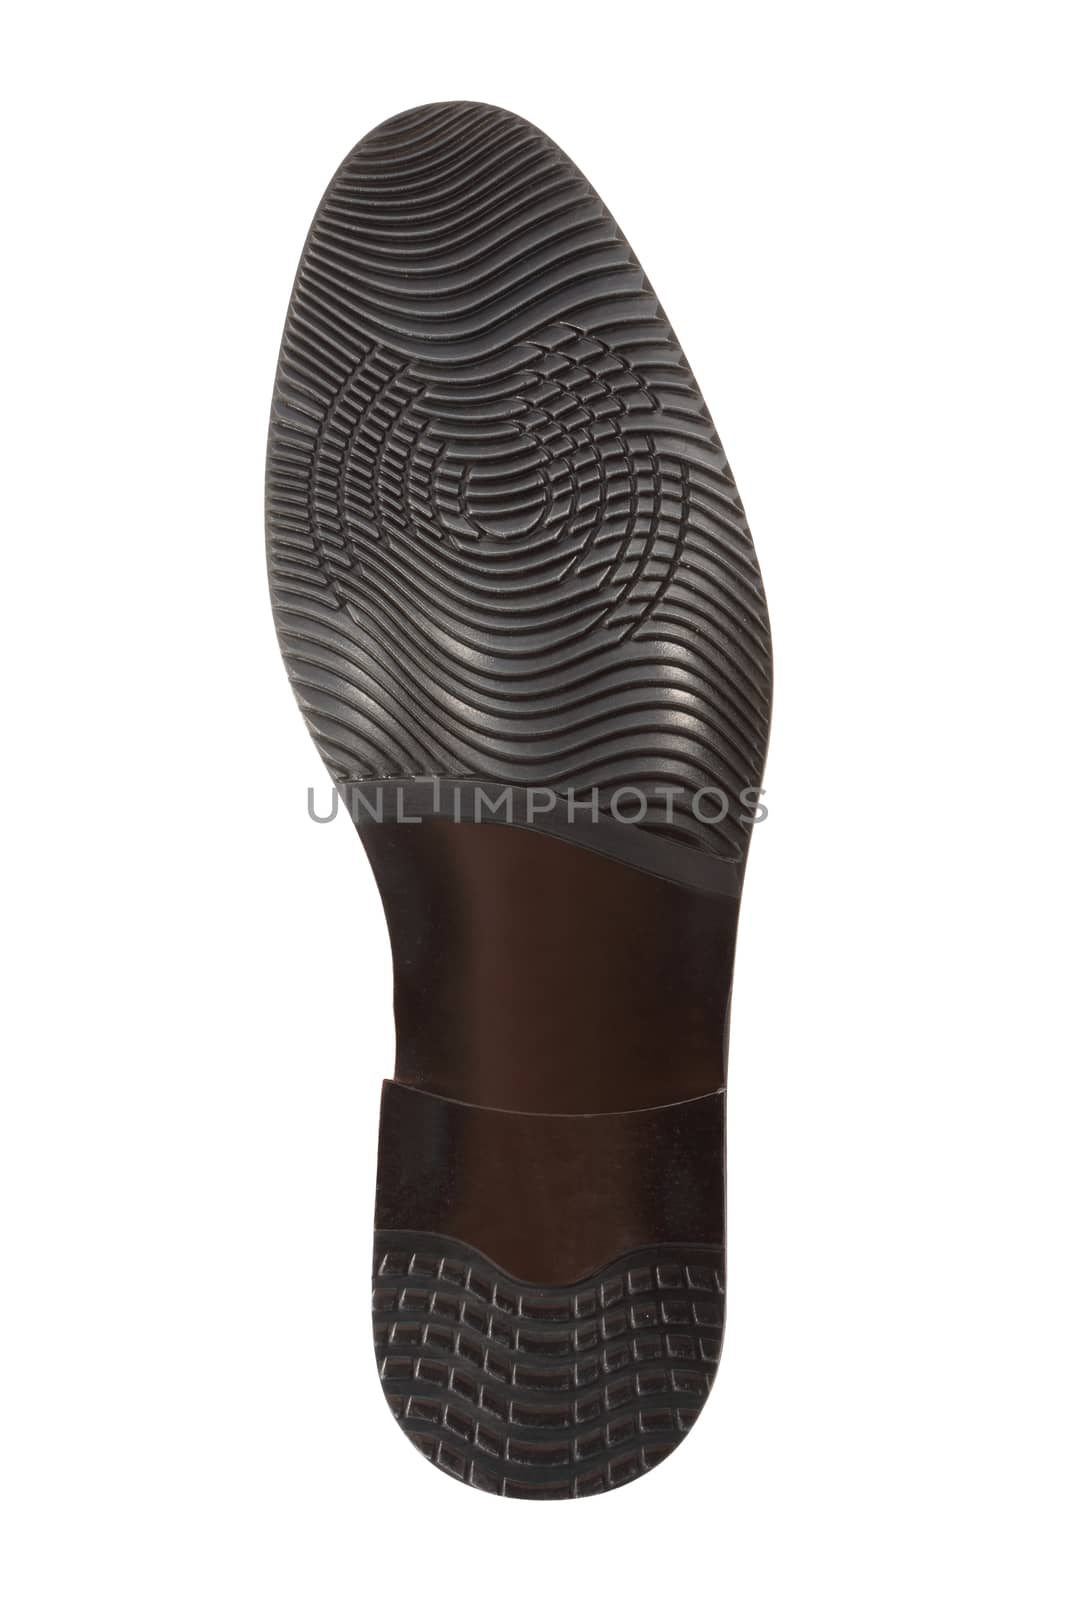 Men's shoe sole leather and composite with clipping path